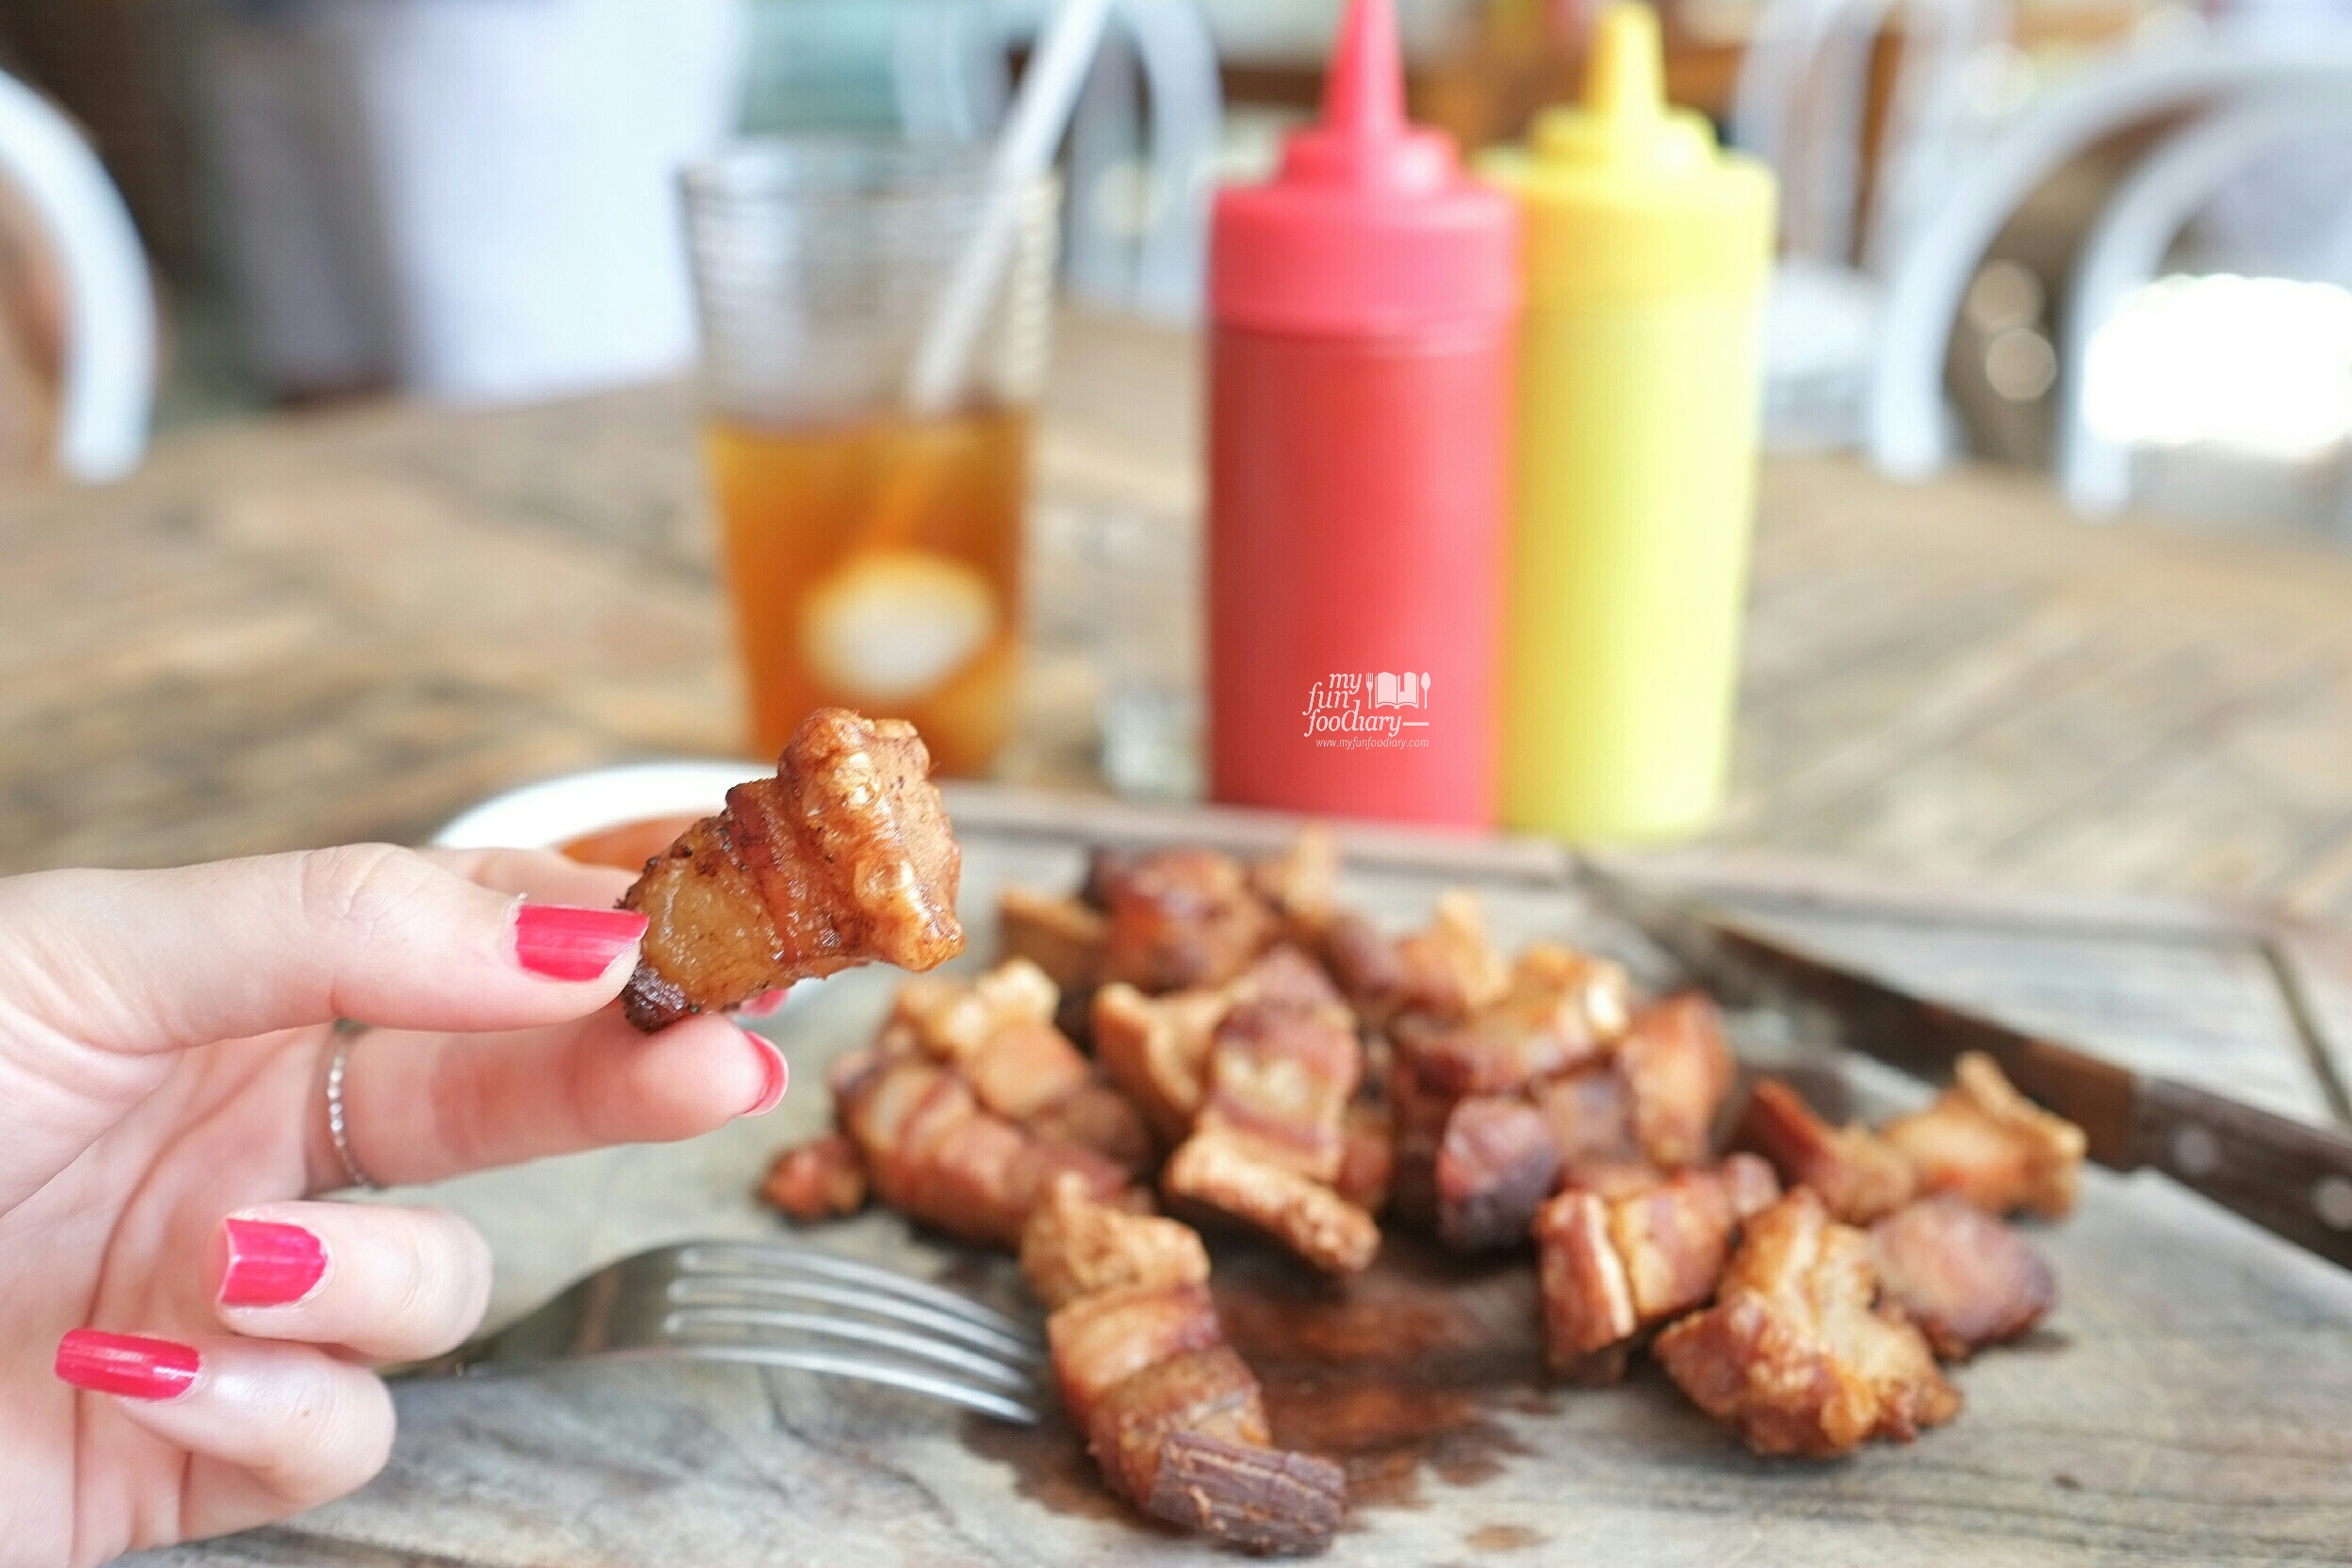 Crispy Pork Belly at Eat Well Bali by Myfunfoodiary